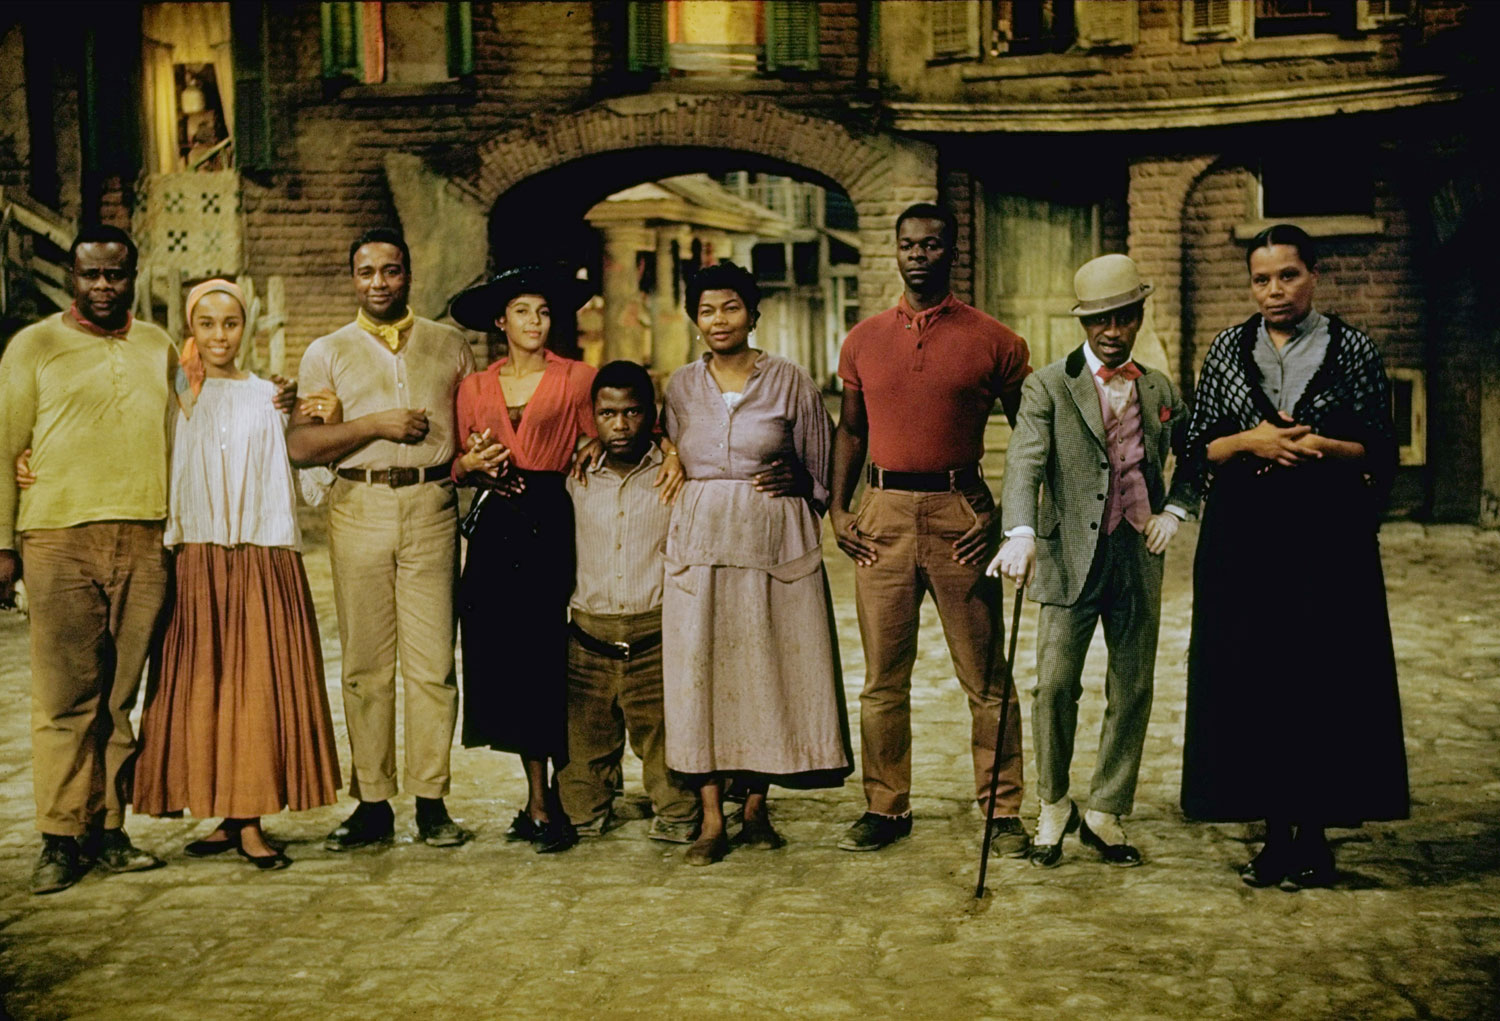 Scene from the set of 'Porgy and Bess,' 1959.